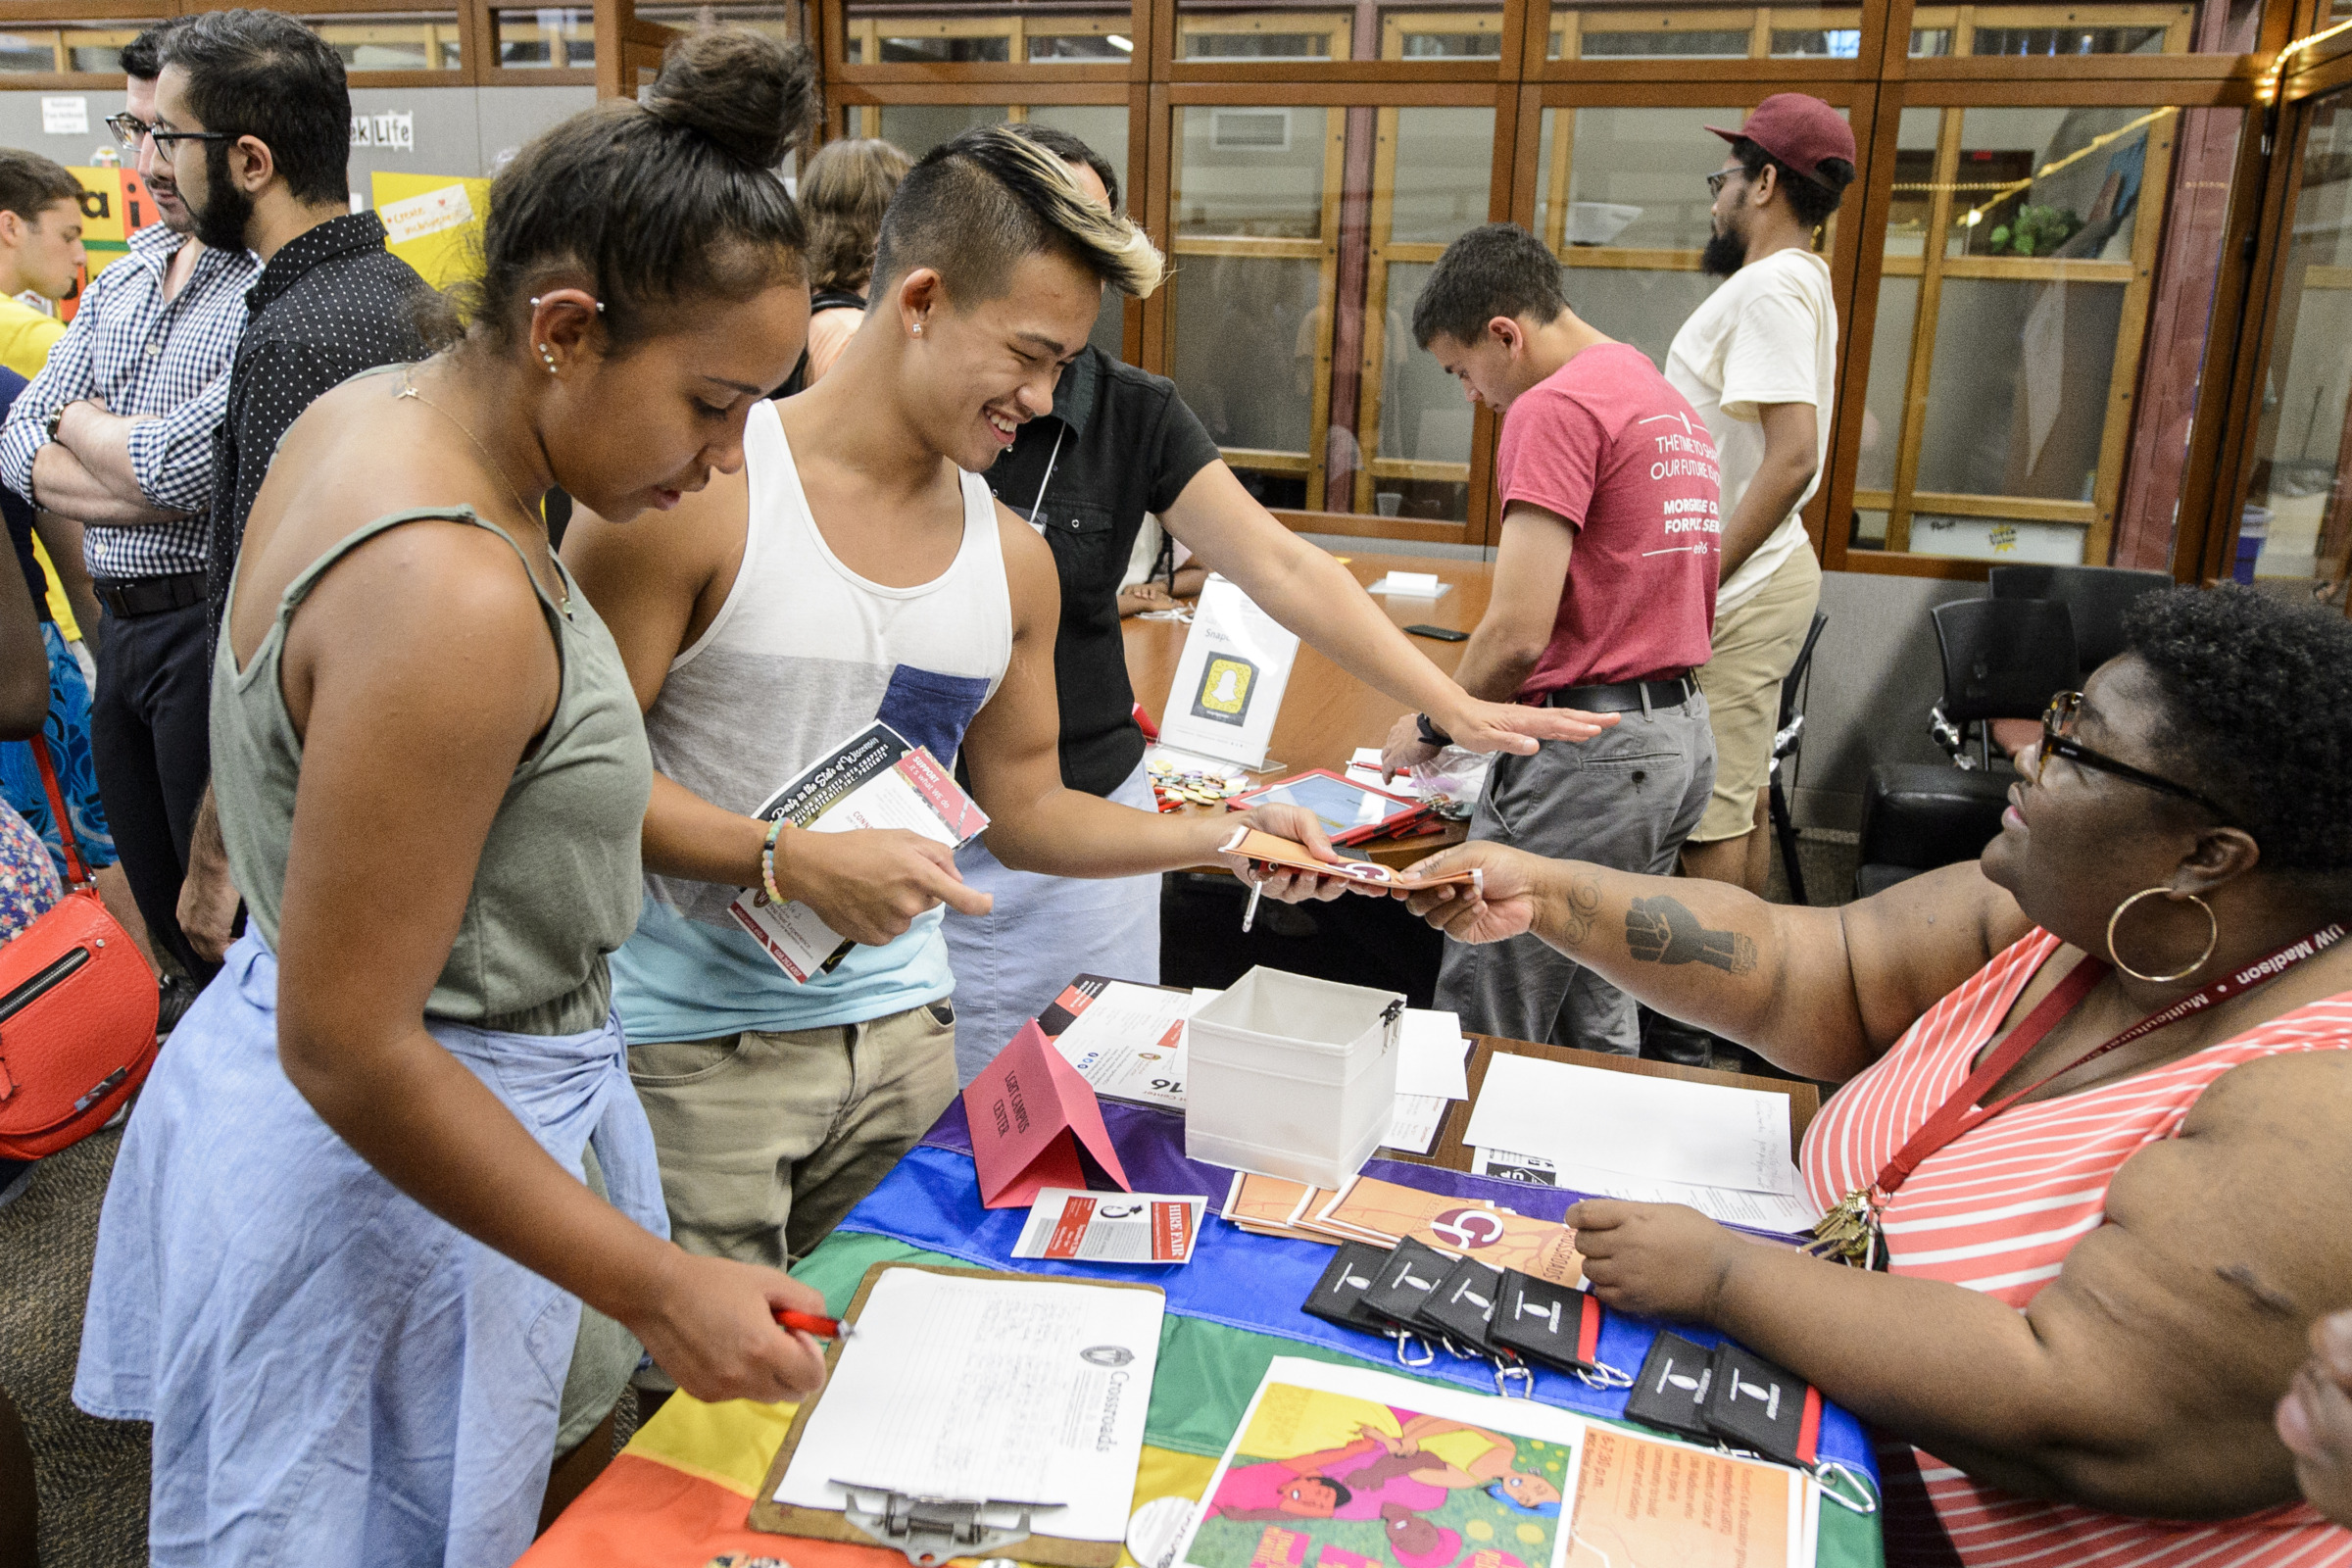 Two undergraduates of color connect with a Black adult seated at the table for the Crossroads organization. They exchange information and literature. (Photo by Bryce Richter / UW-Madison)